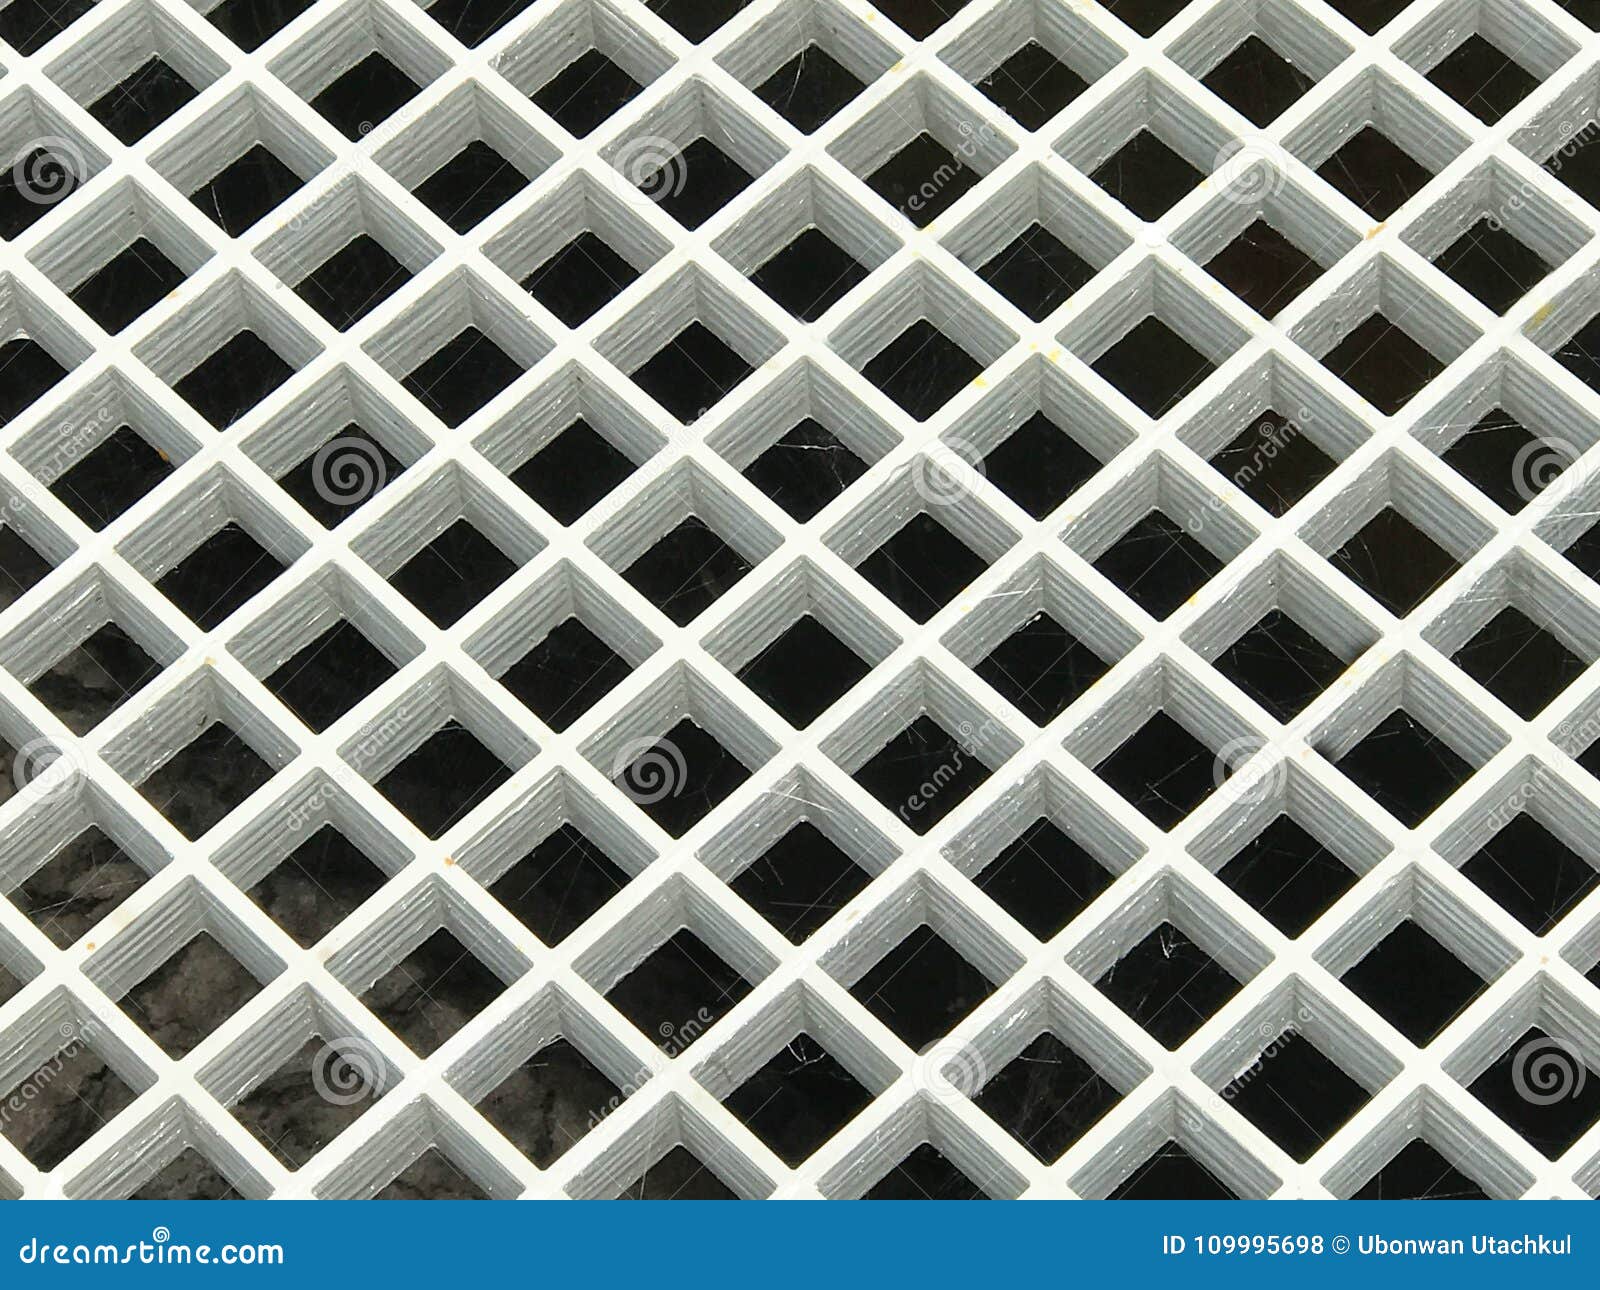 Pattern of White Pvc Plastic Grid Drain Cover Stock Photo - Image of floor,  grid: 109995698